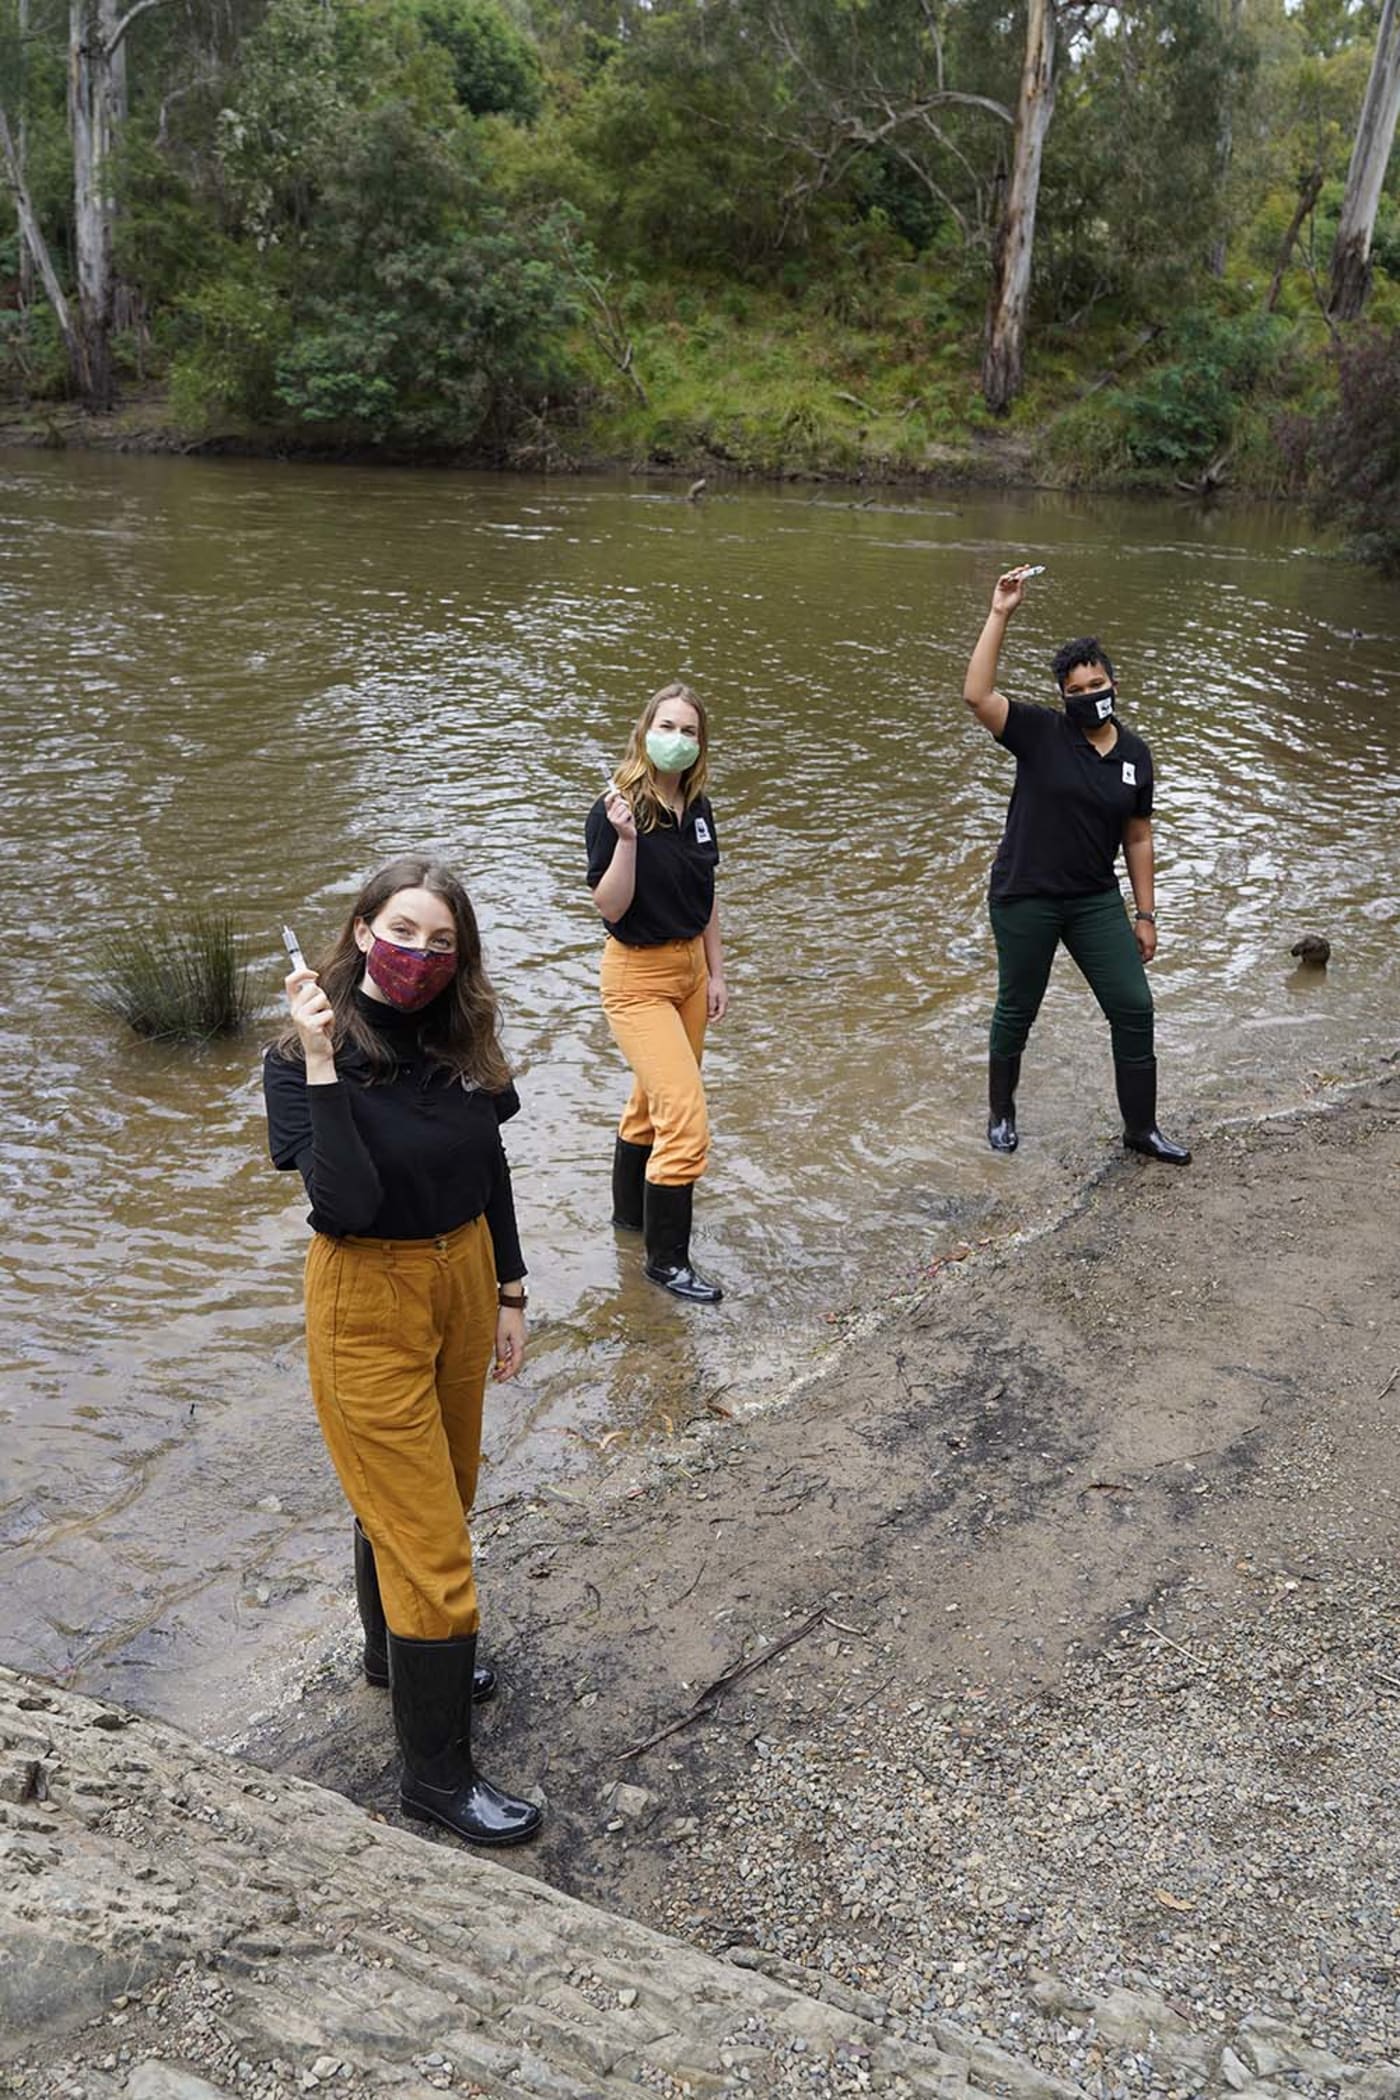 Pictured left to right: WWF-Australia's Melbourne Pandas Sophie Hueppauff, Karina Strange, and Victoria Pilbeam, celebrating the launch of the Great Australian Platypus Search at Pound Bend Tunnel in Warrandyte, Victoria